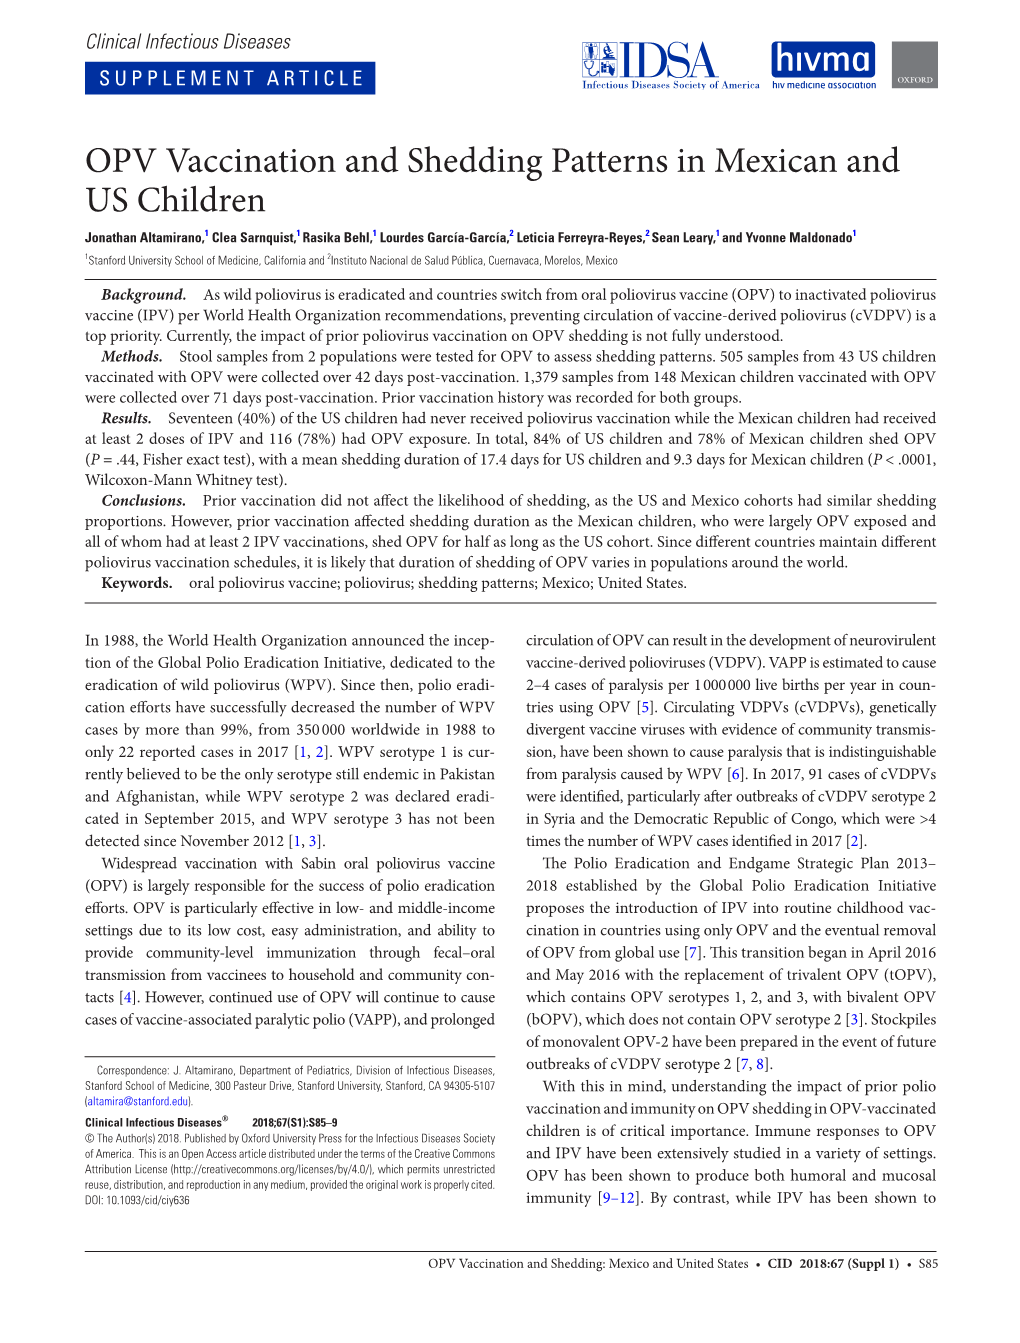 OPV Vaccination and Shedding Patterns in Mexican and US Children